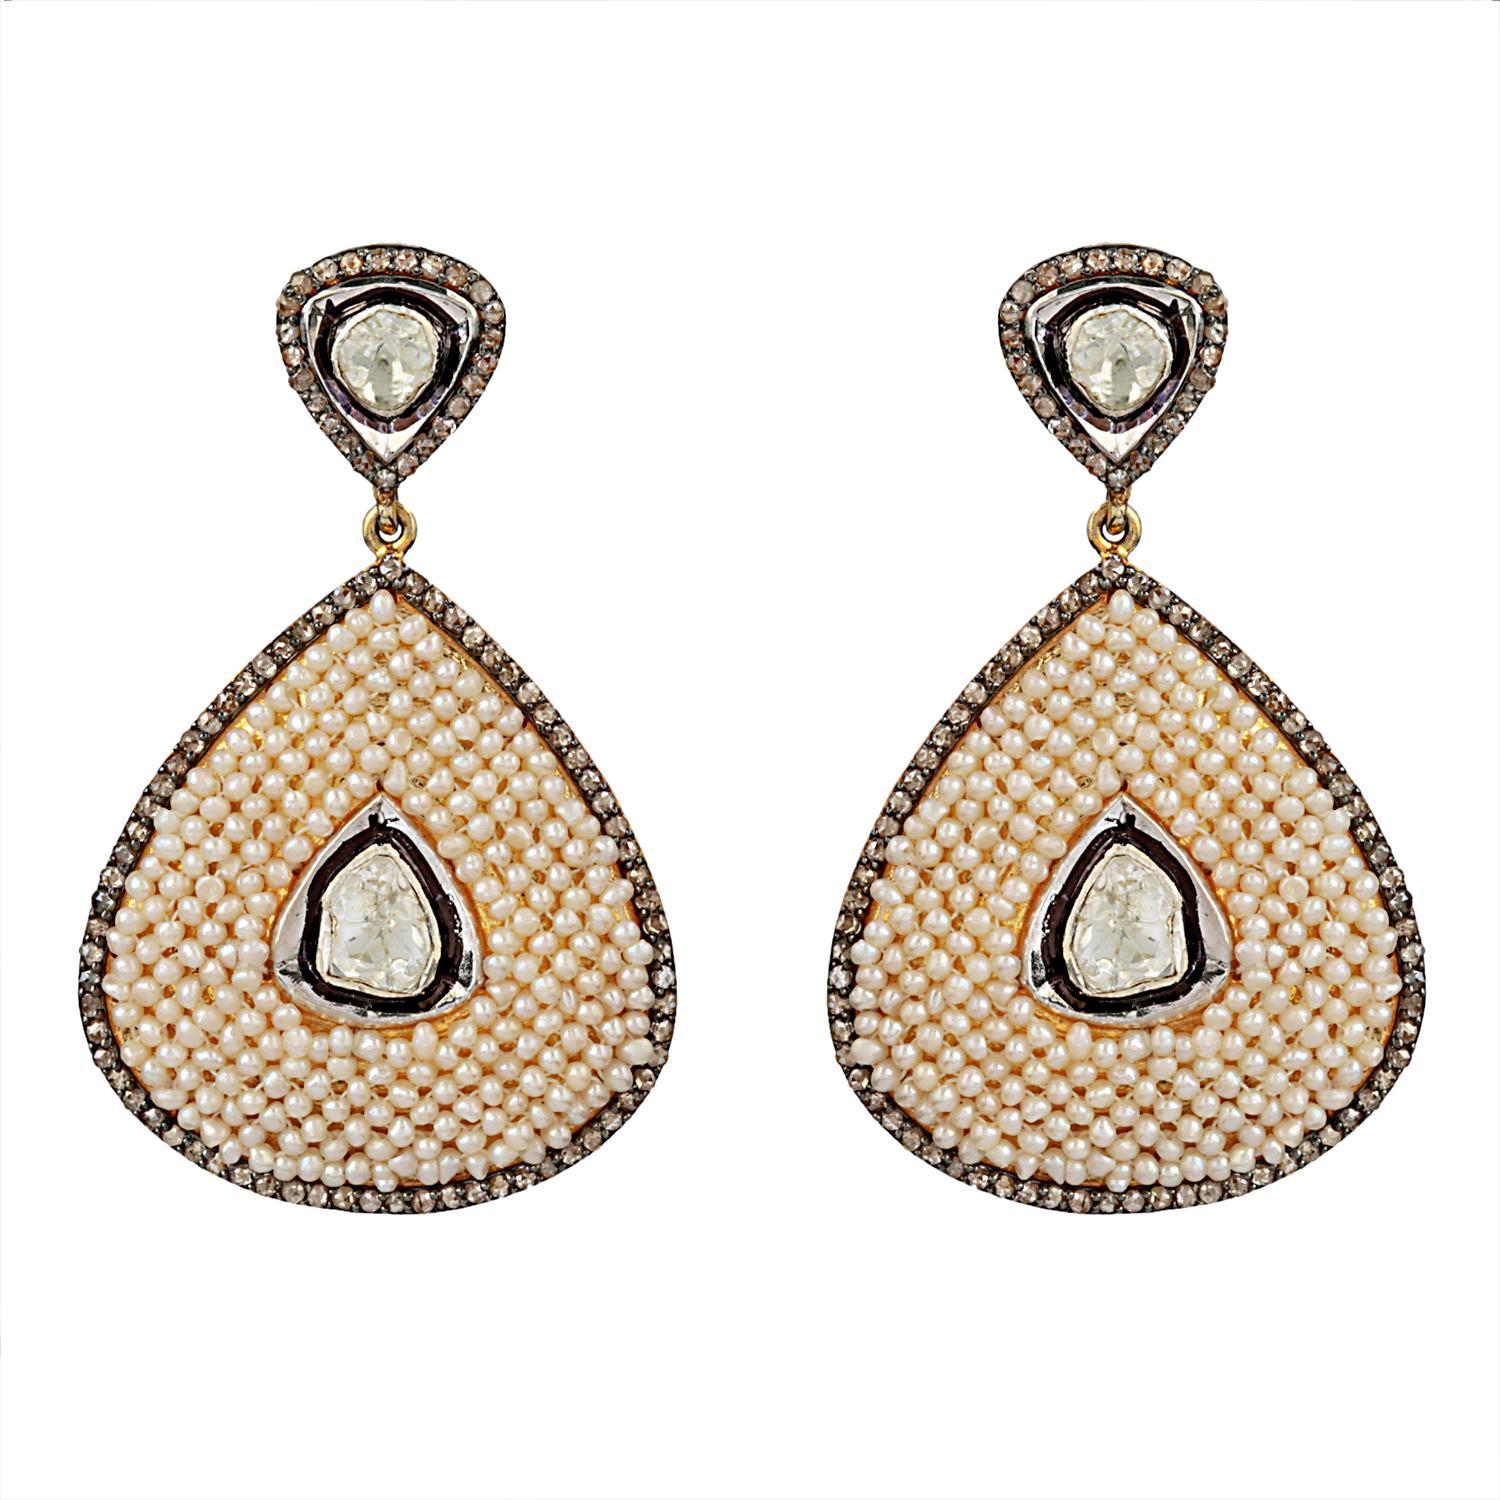 Pearl Drop Dangle Silver Earring with Diamond 2.40 carat. Total Gross weight Of the drop dangle earring worth 19.300 grams with 14k polished gold 0.290 grams and 925 sterling silver worth 16.31 grams. Pearls with 11.10 carats.

Pearl helps in curing